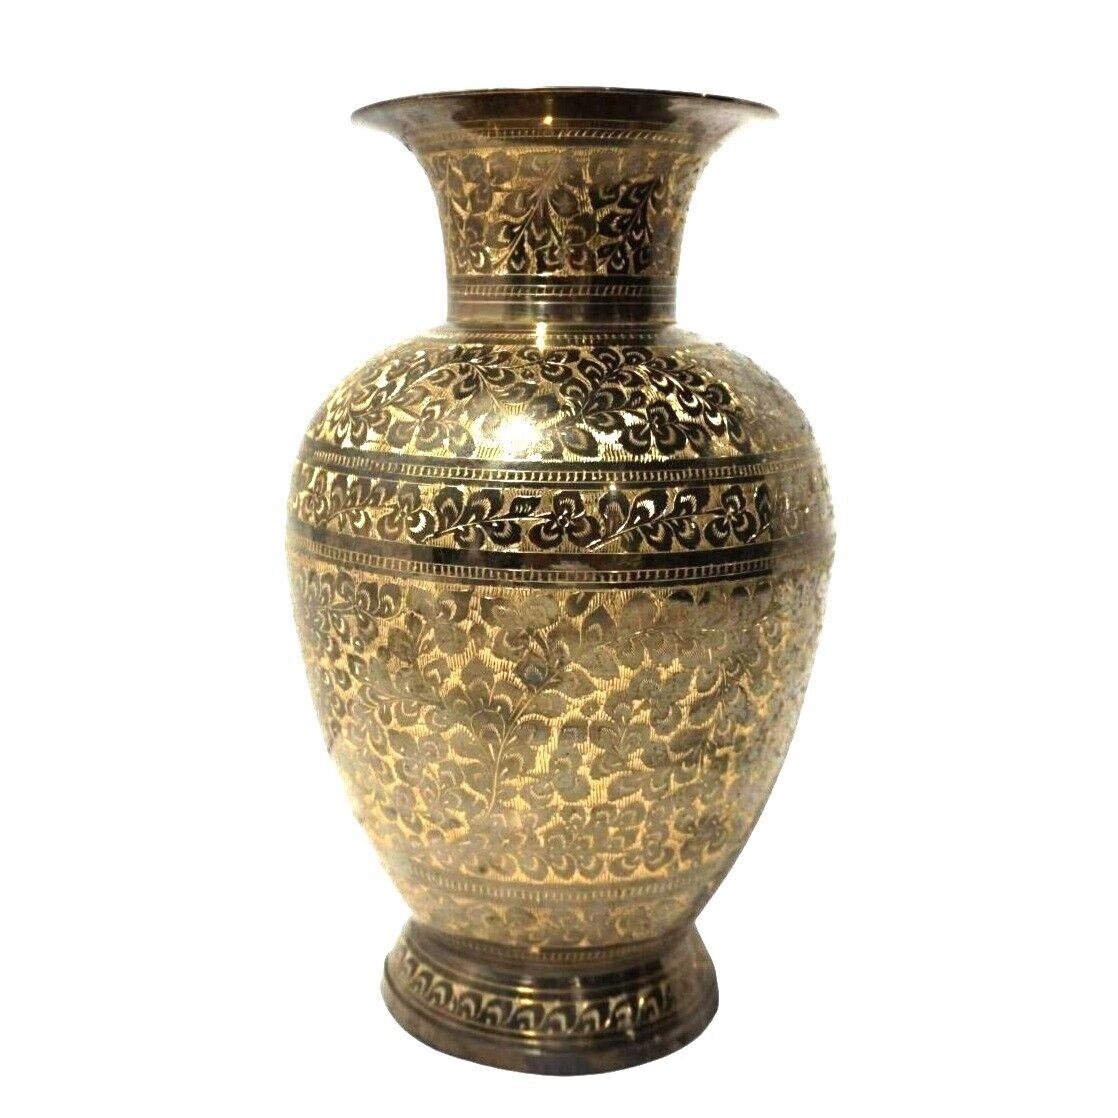 Beautiful Tall Brass Vase with Intricate Floral Etchings, Engraved in India